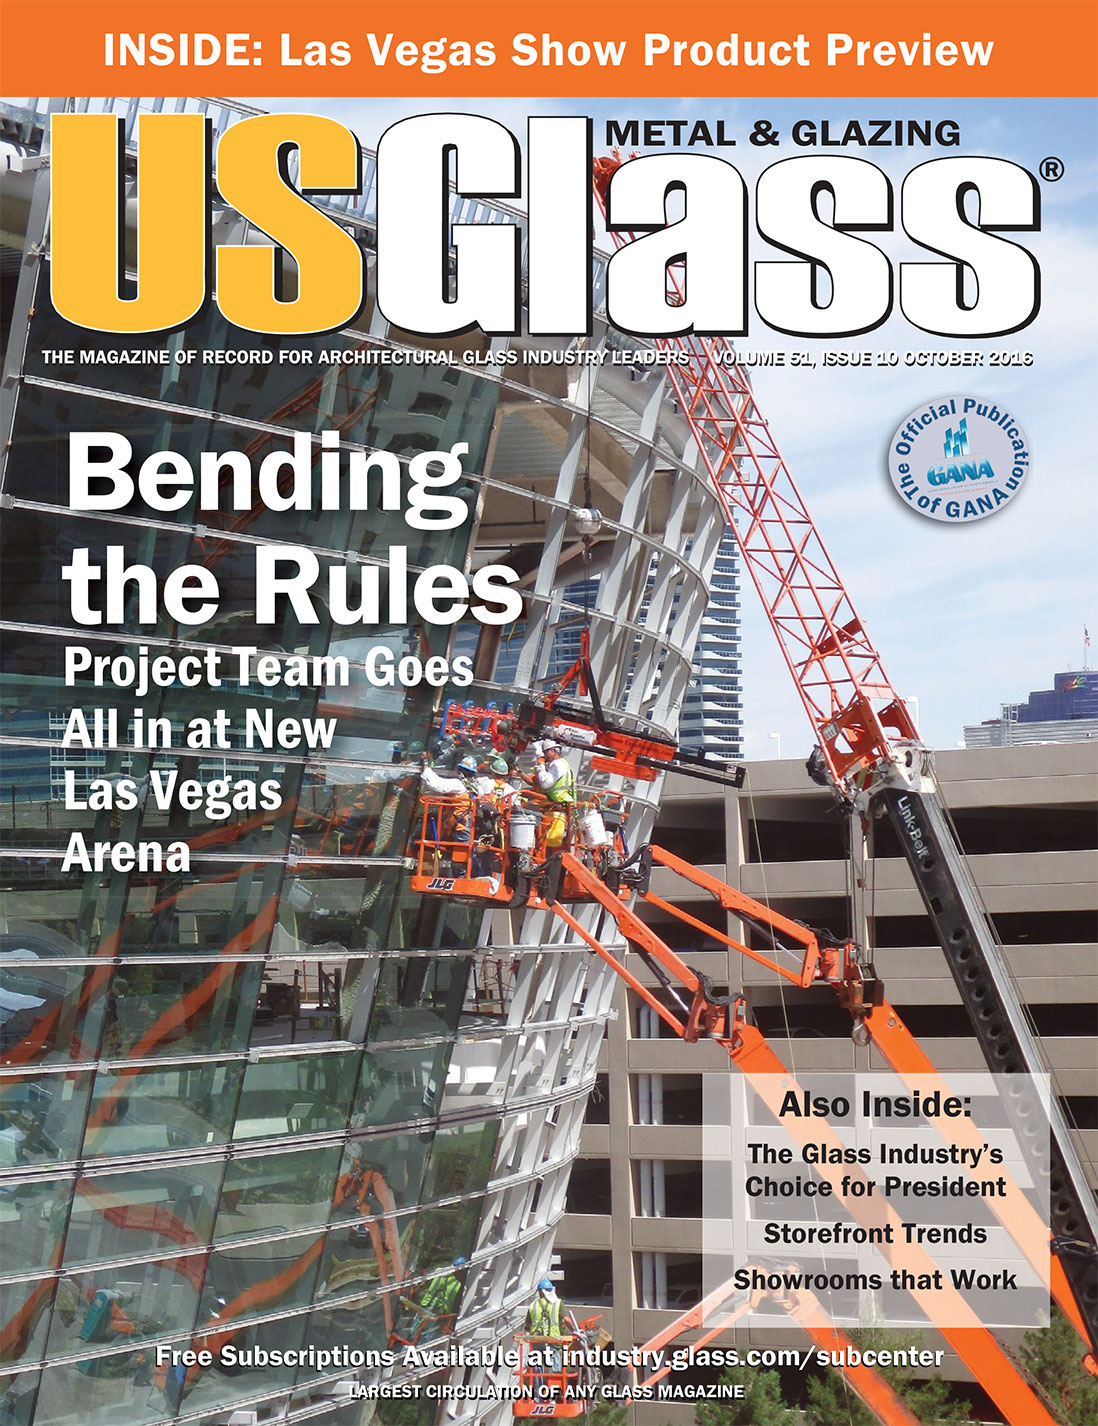 Sizing Up: Considerations for Oversized Glass Production